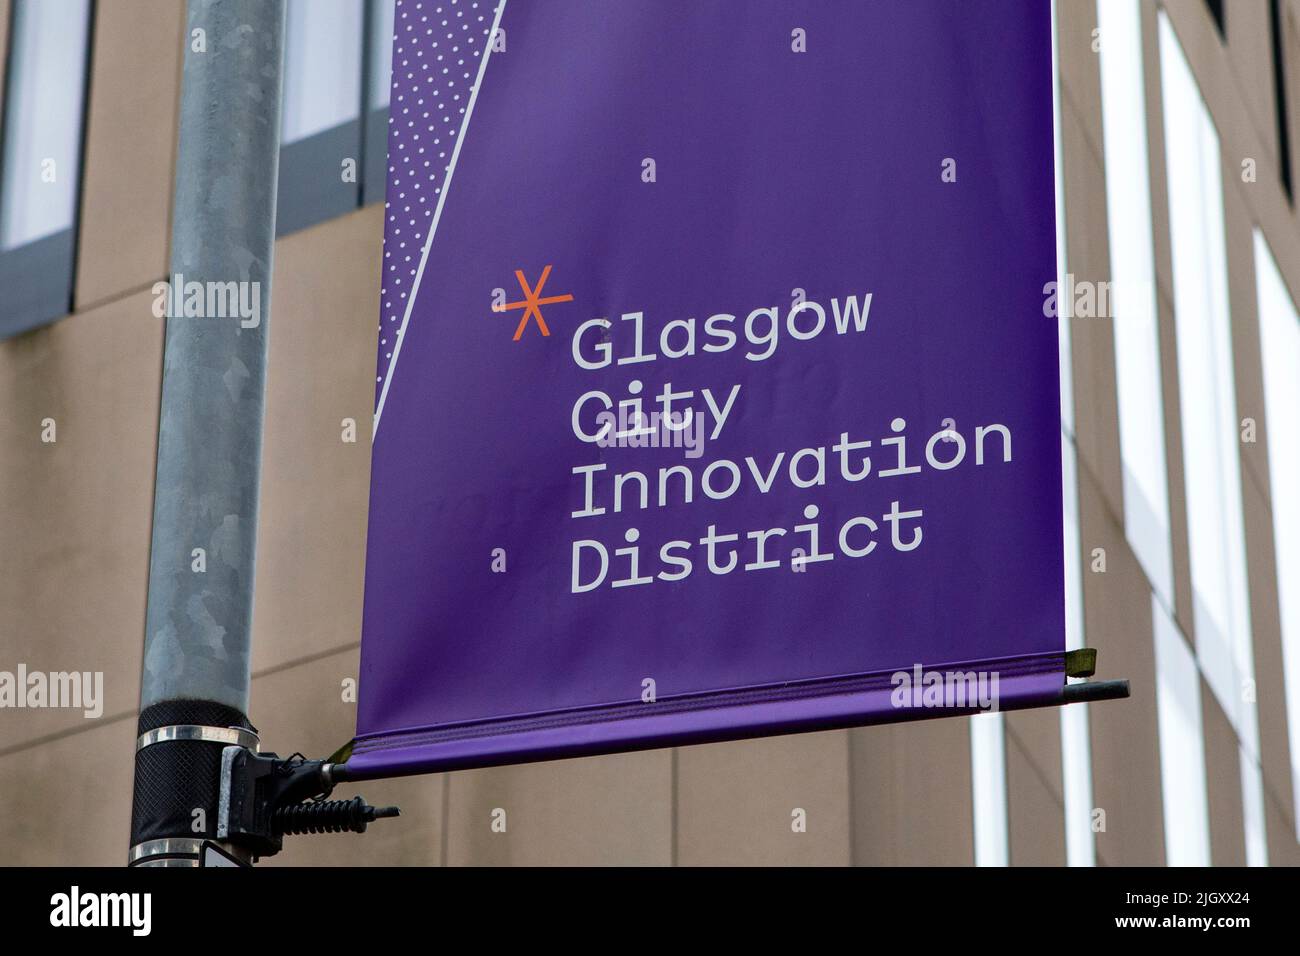 Glasgow, Scotland - October 12th 2021: Glasgow City Innovation District sign in the city of Glasgow, Scotland. Stock Photo